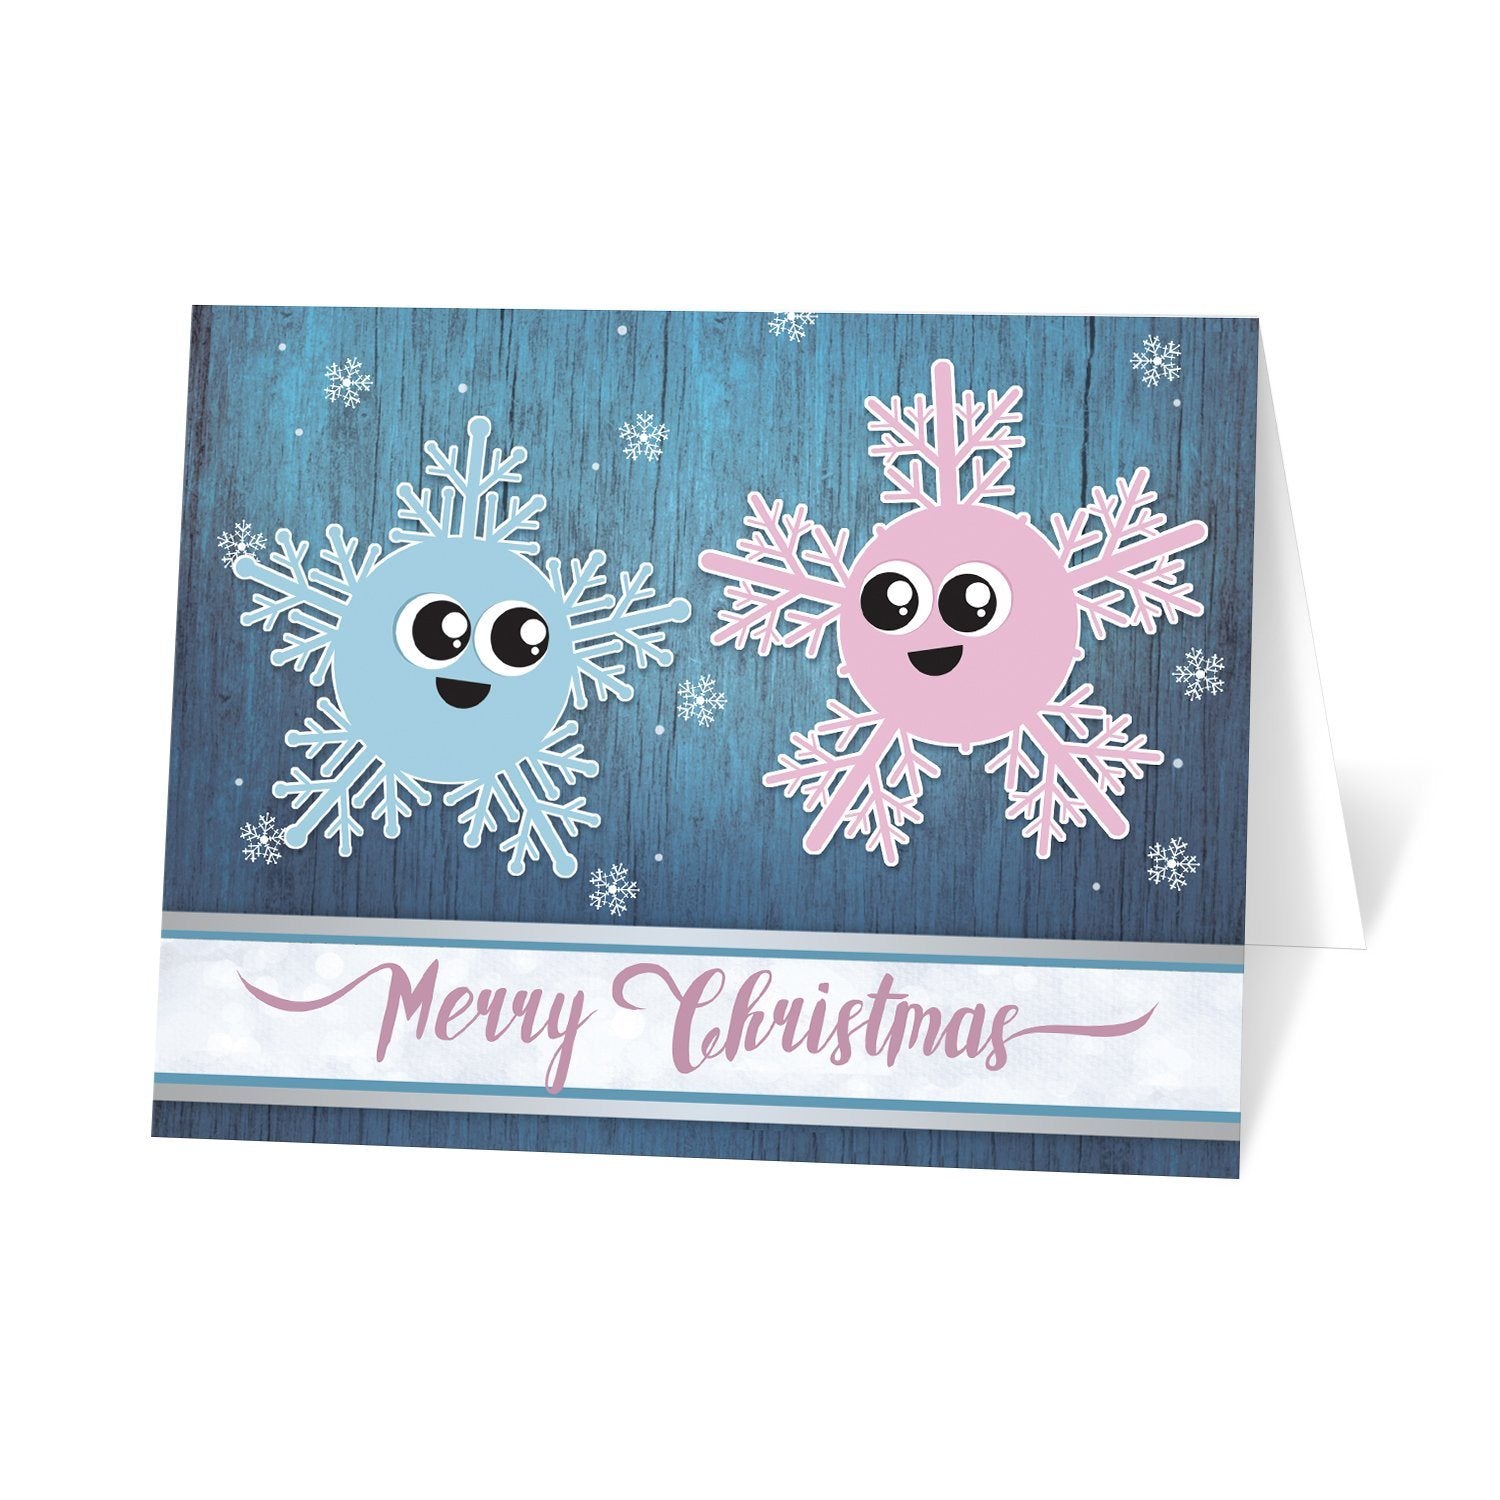 Cute Blue Rustic Winter Snowflakes Merry Christmas Cards at Artistically Invited